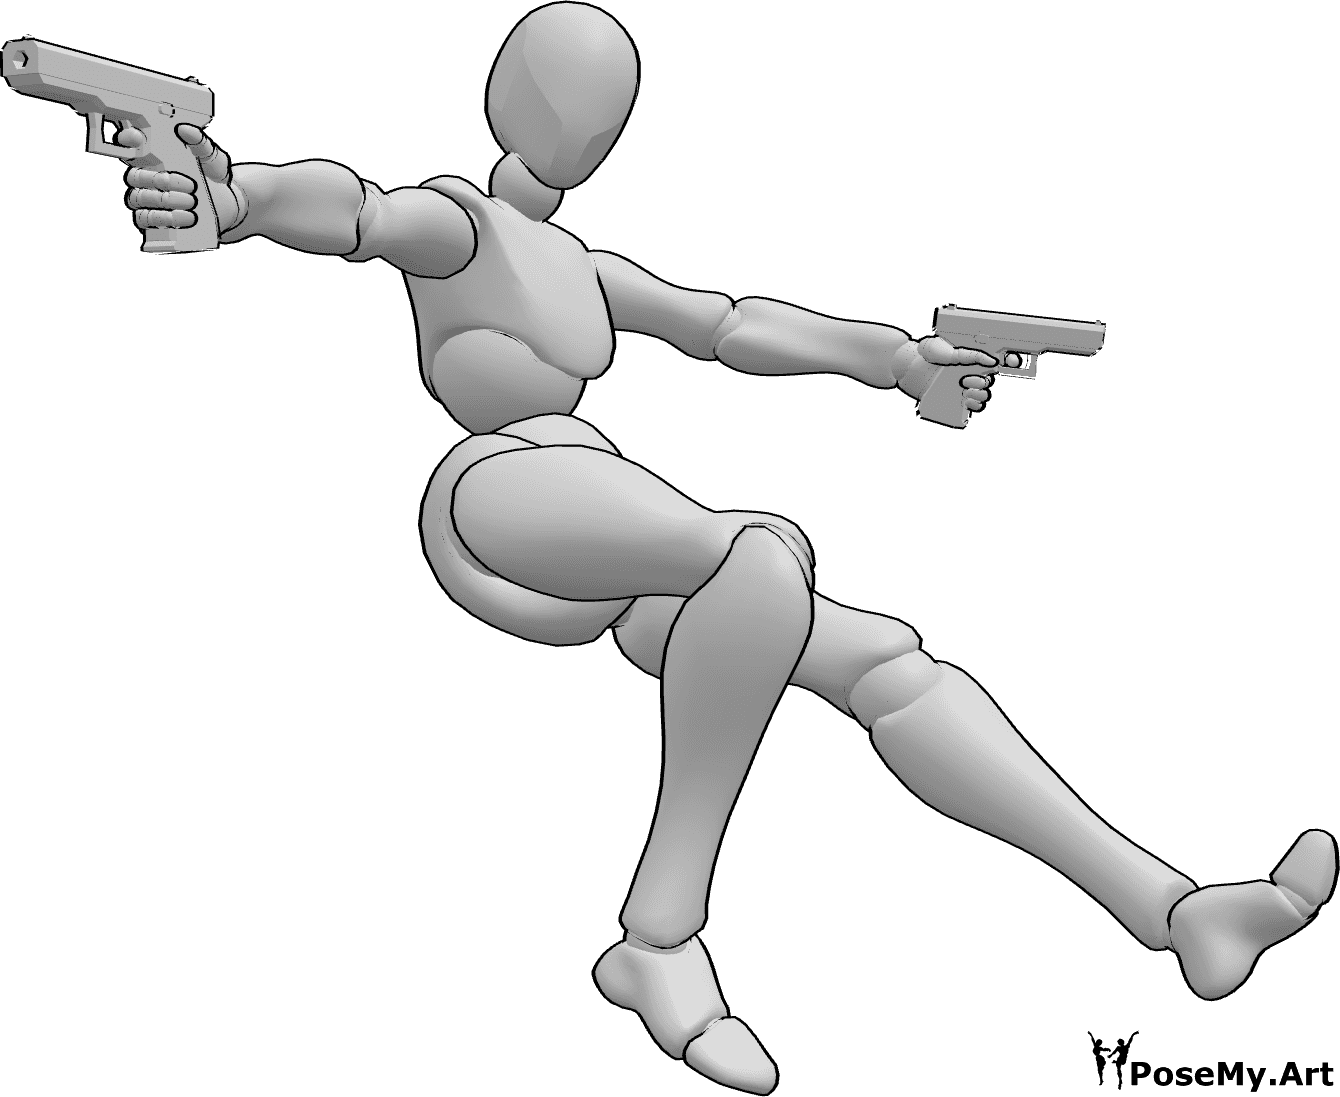 Learning to draw action poses : r/drawing